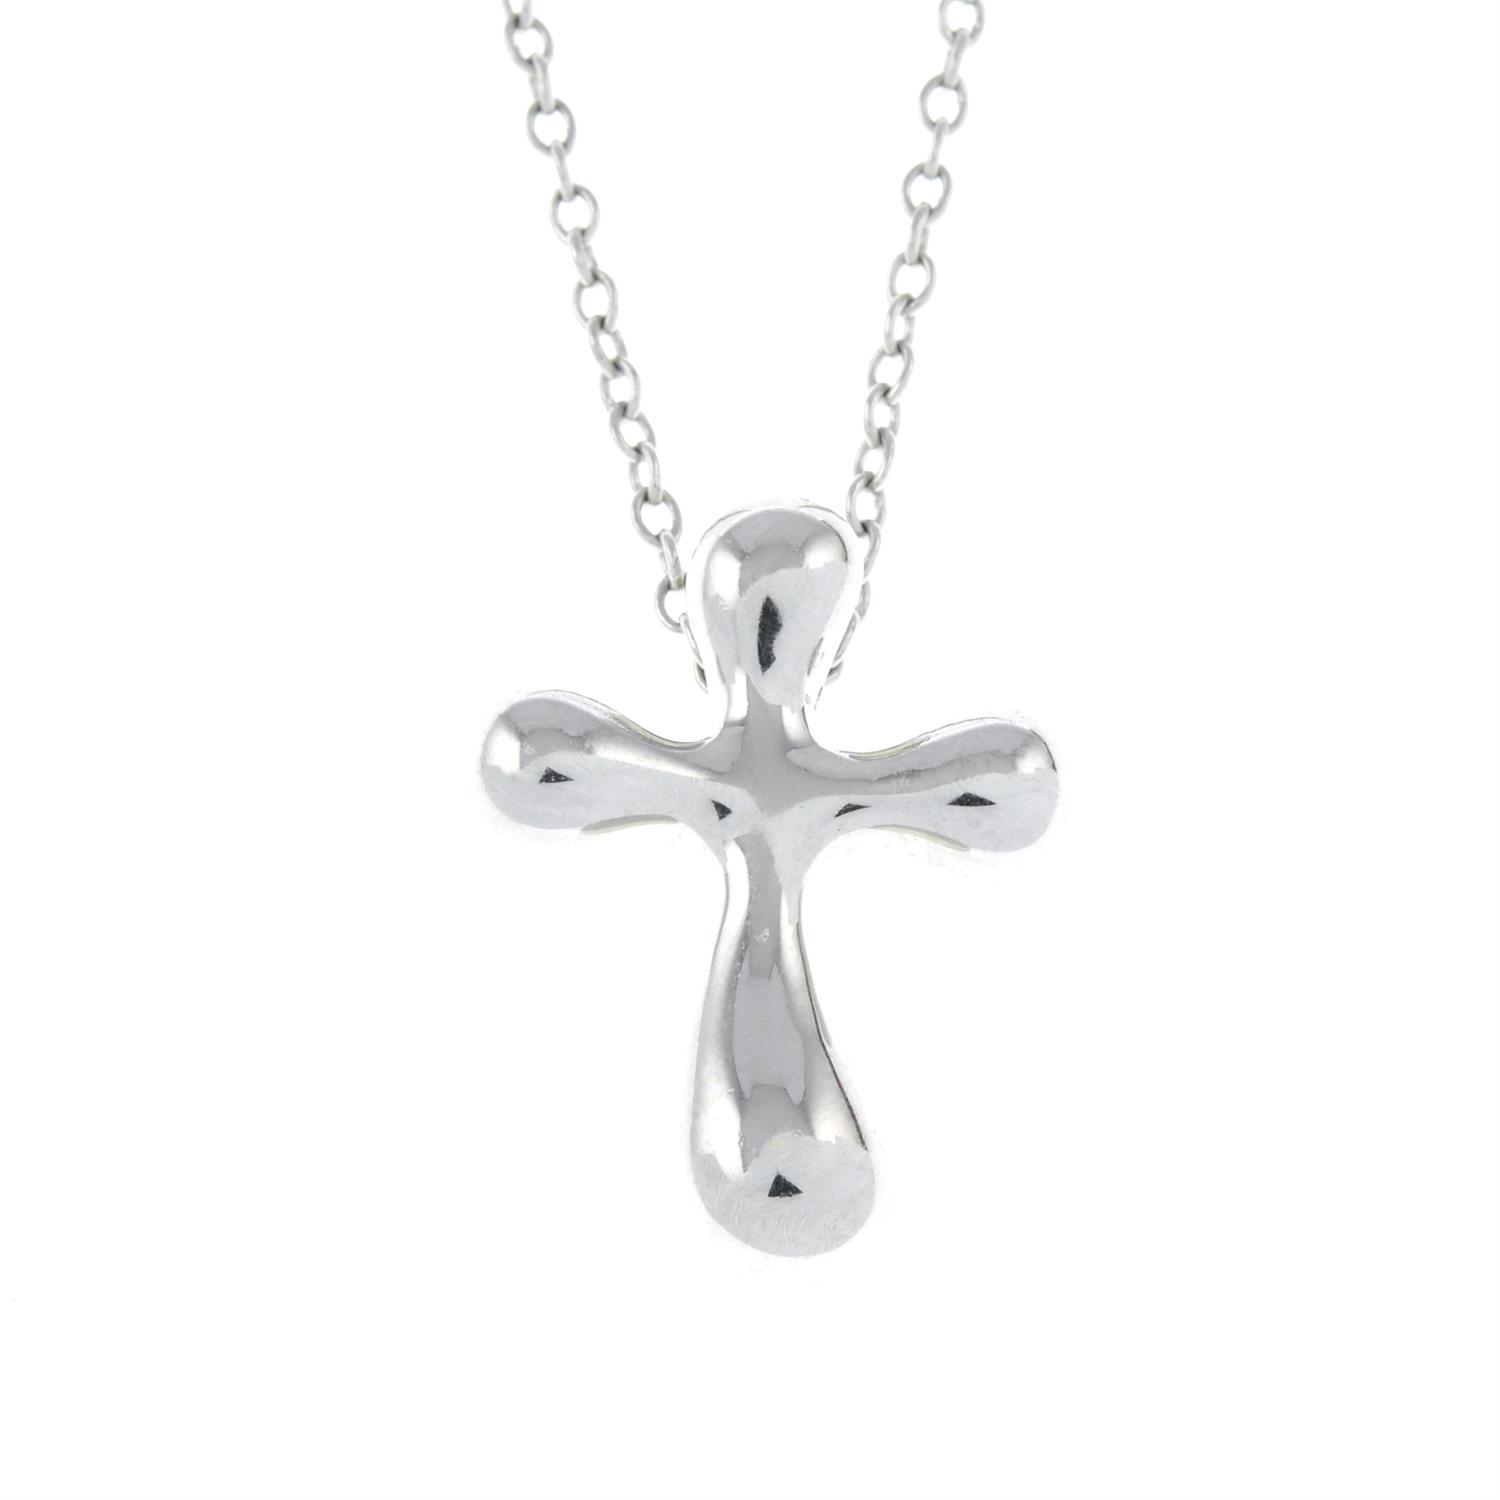 A cross pendant, with chain, by Elsa Peretti for Tiffany & Co.